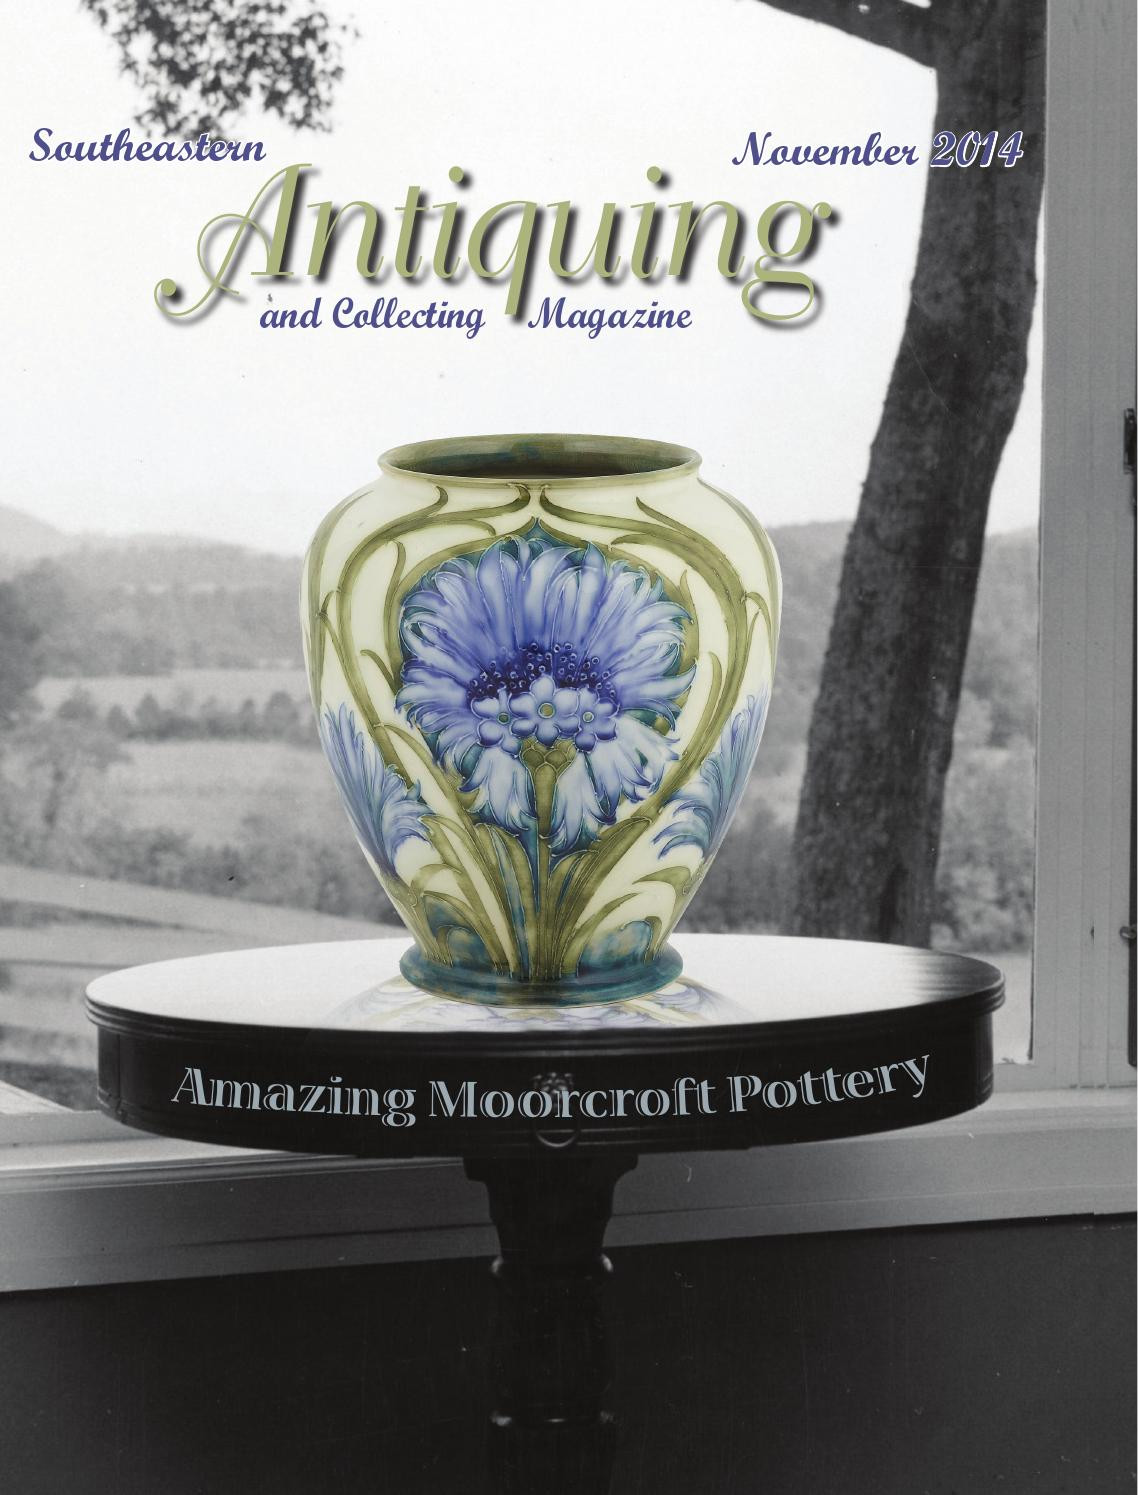 baccarat vase ebay of southeastern antiquing and collecting magazine november 2014 by inside southeastern antiquing and collecting magazine november 2014 by southeastern antiquing and collecting magazine issuu